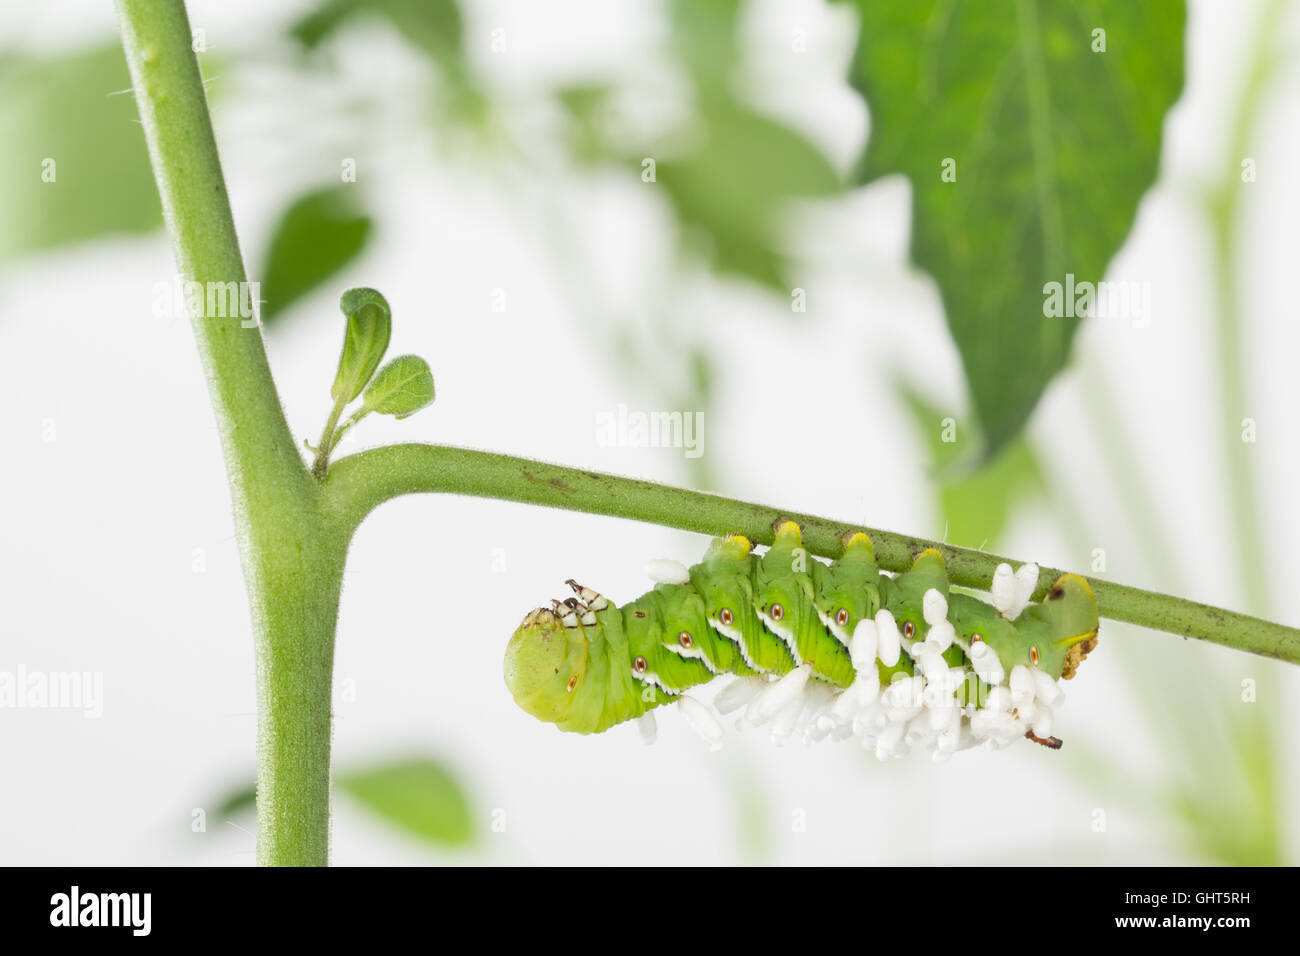 Tobacco hornworm with parasitic braconid wasp pupa cocoons that have recently emerged. Stock Photo